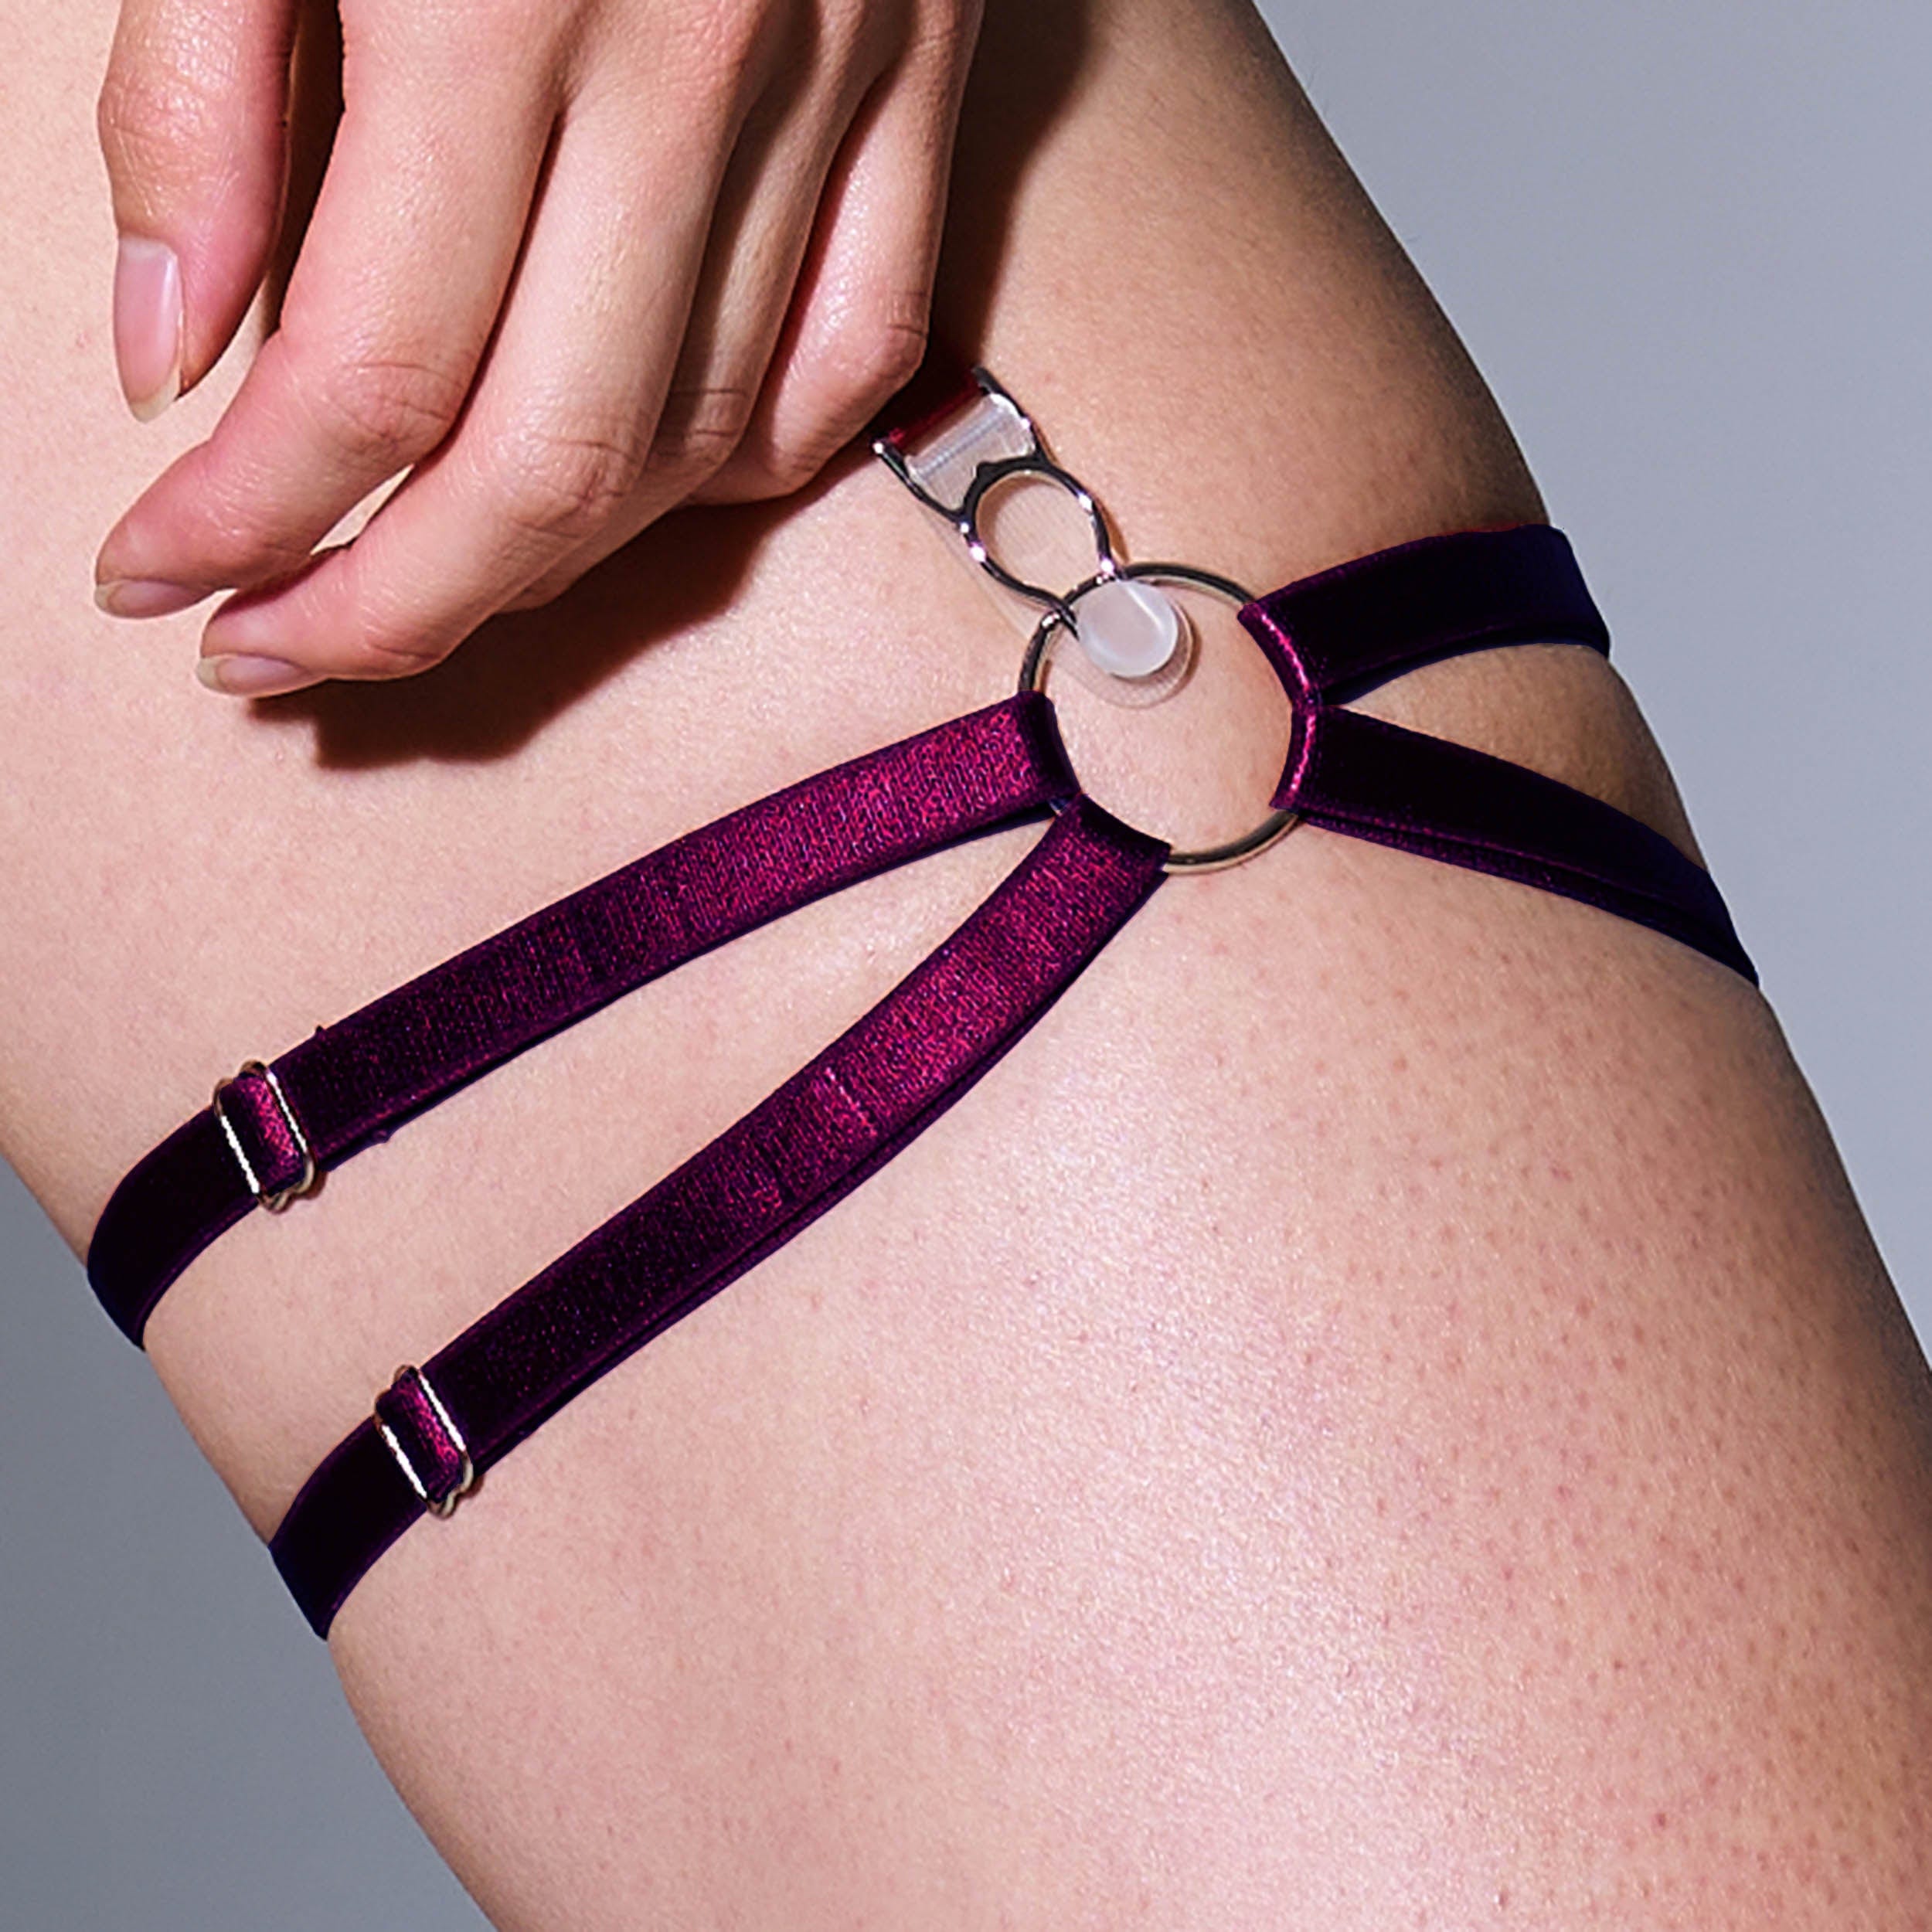 Strapped in Thigh Garters - Cherry